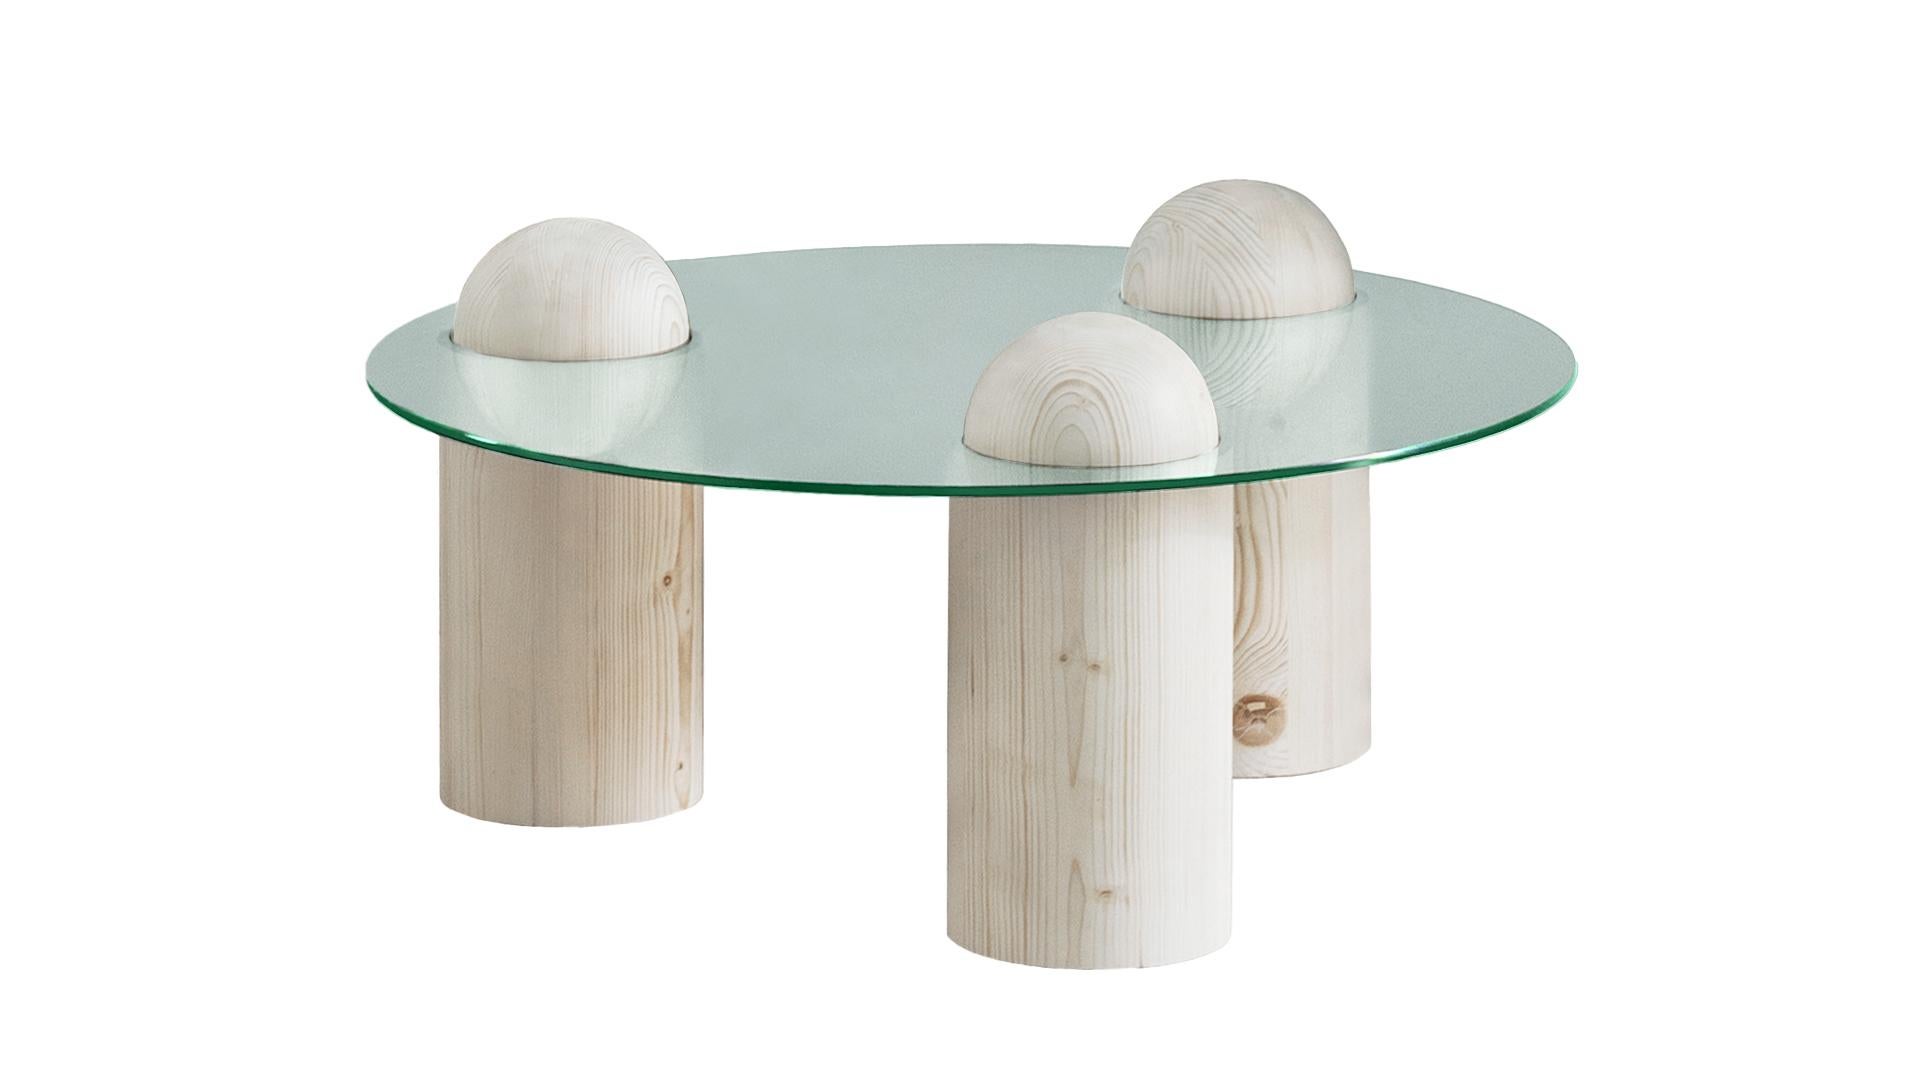 Jonas coffee table by LI-AN-LO Studio
Dimensions: ø 90 x 44 cm.
Materials: Spruce and clear tempered glass.

Clear or bronze coloured glass top options available.

JONAS is a coffee table that stands steady on the ground on three stable legs